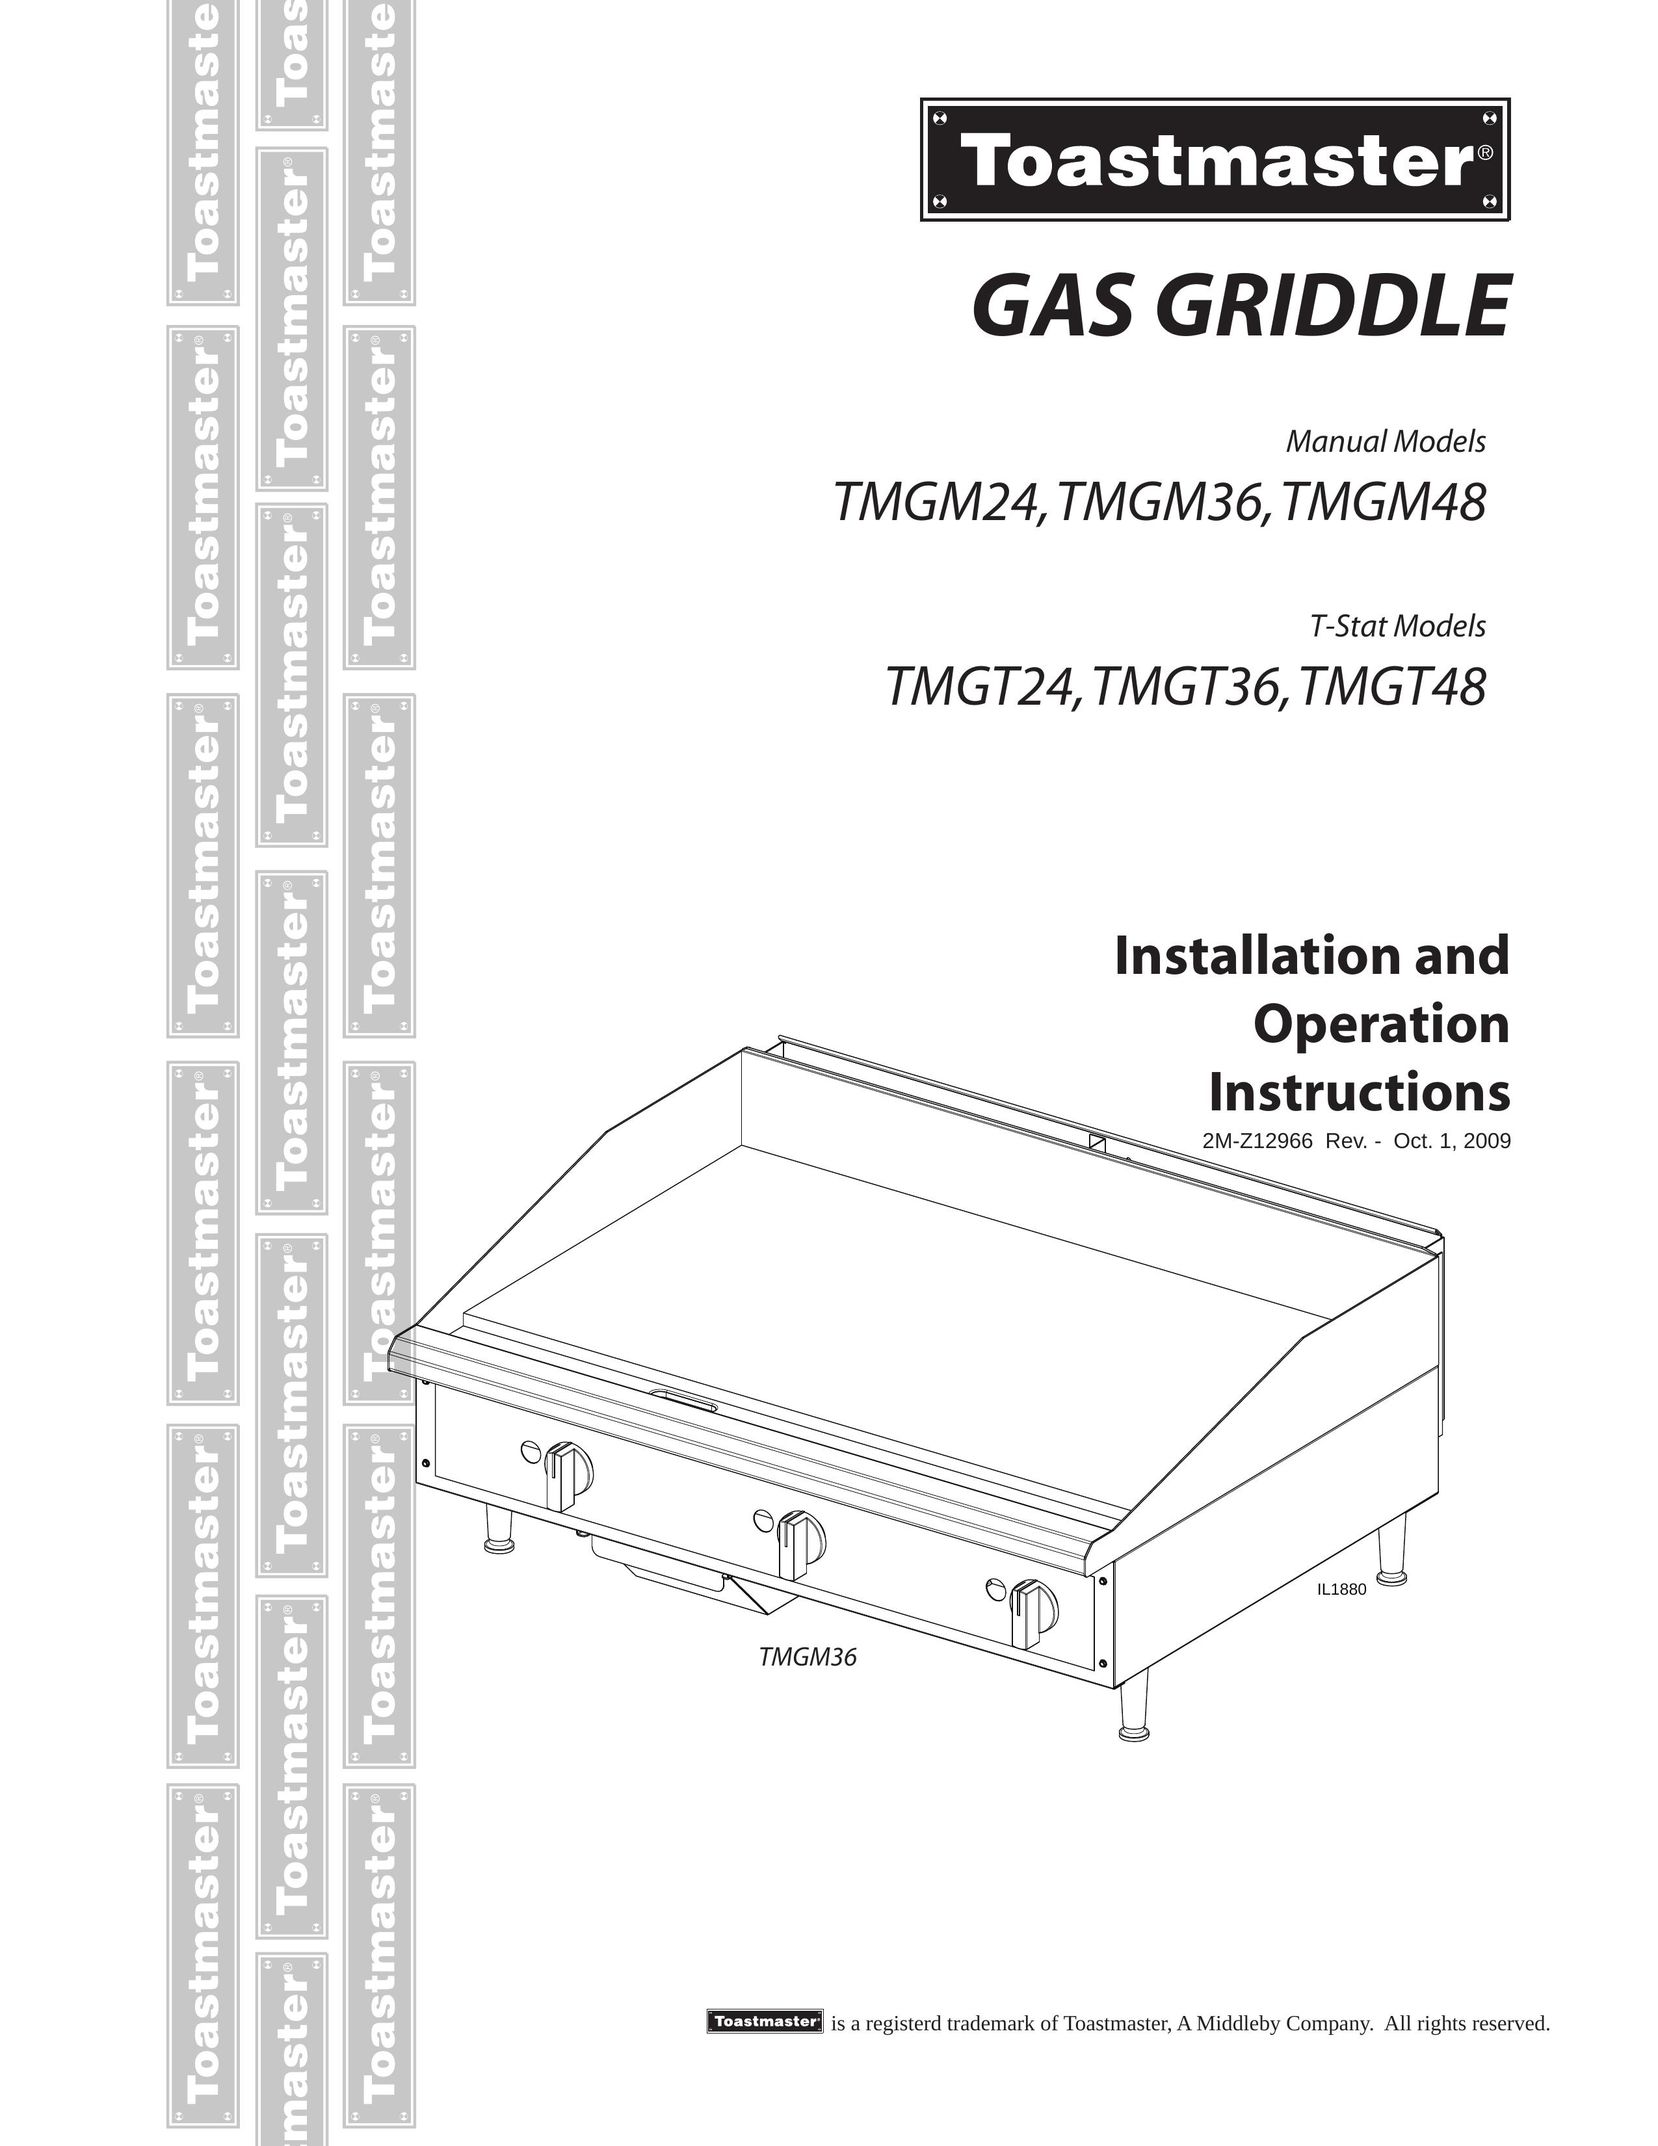 Toastmaster TMGT24 Griddle User Manual